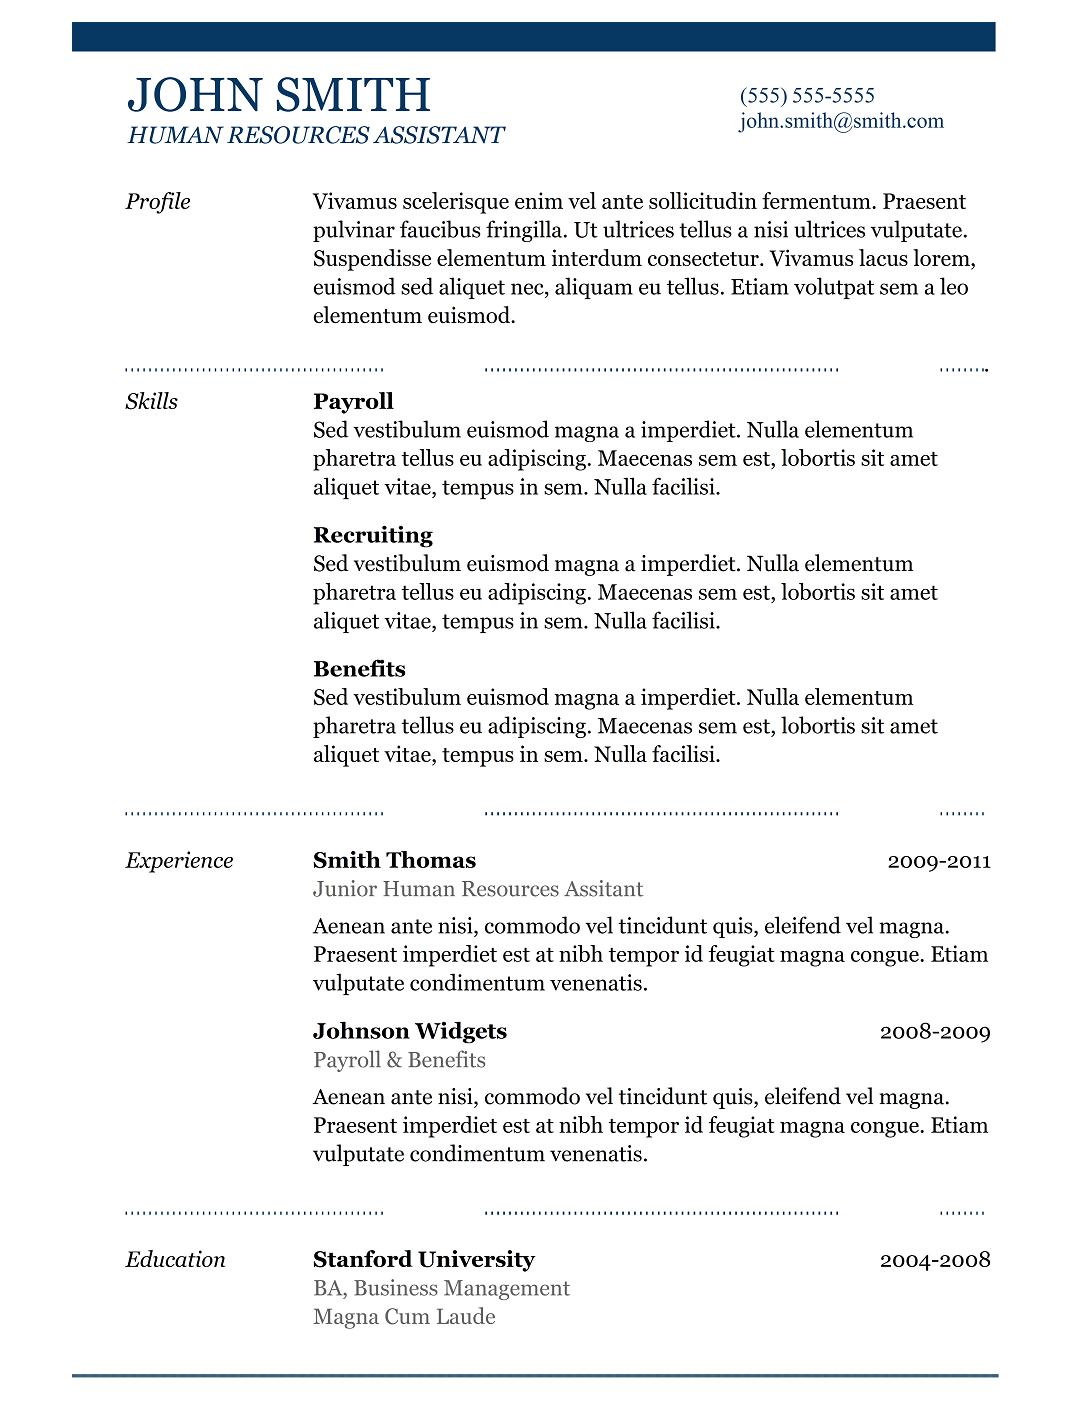 Free sample resume of production manager